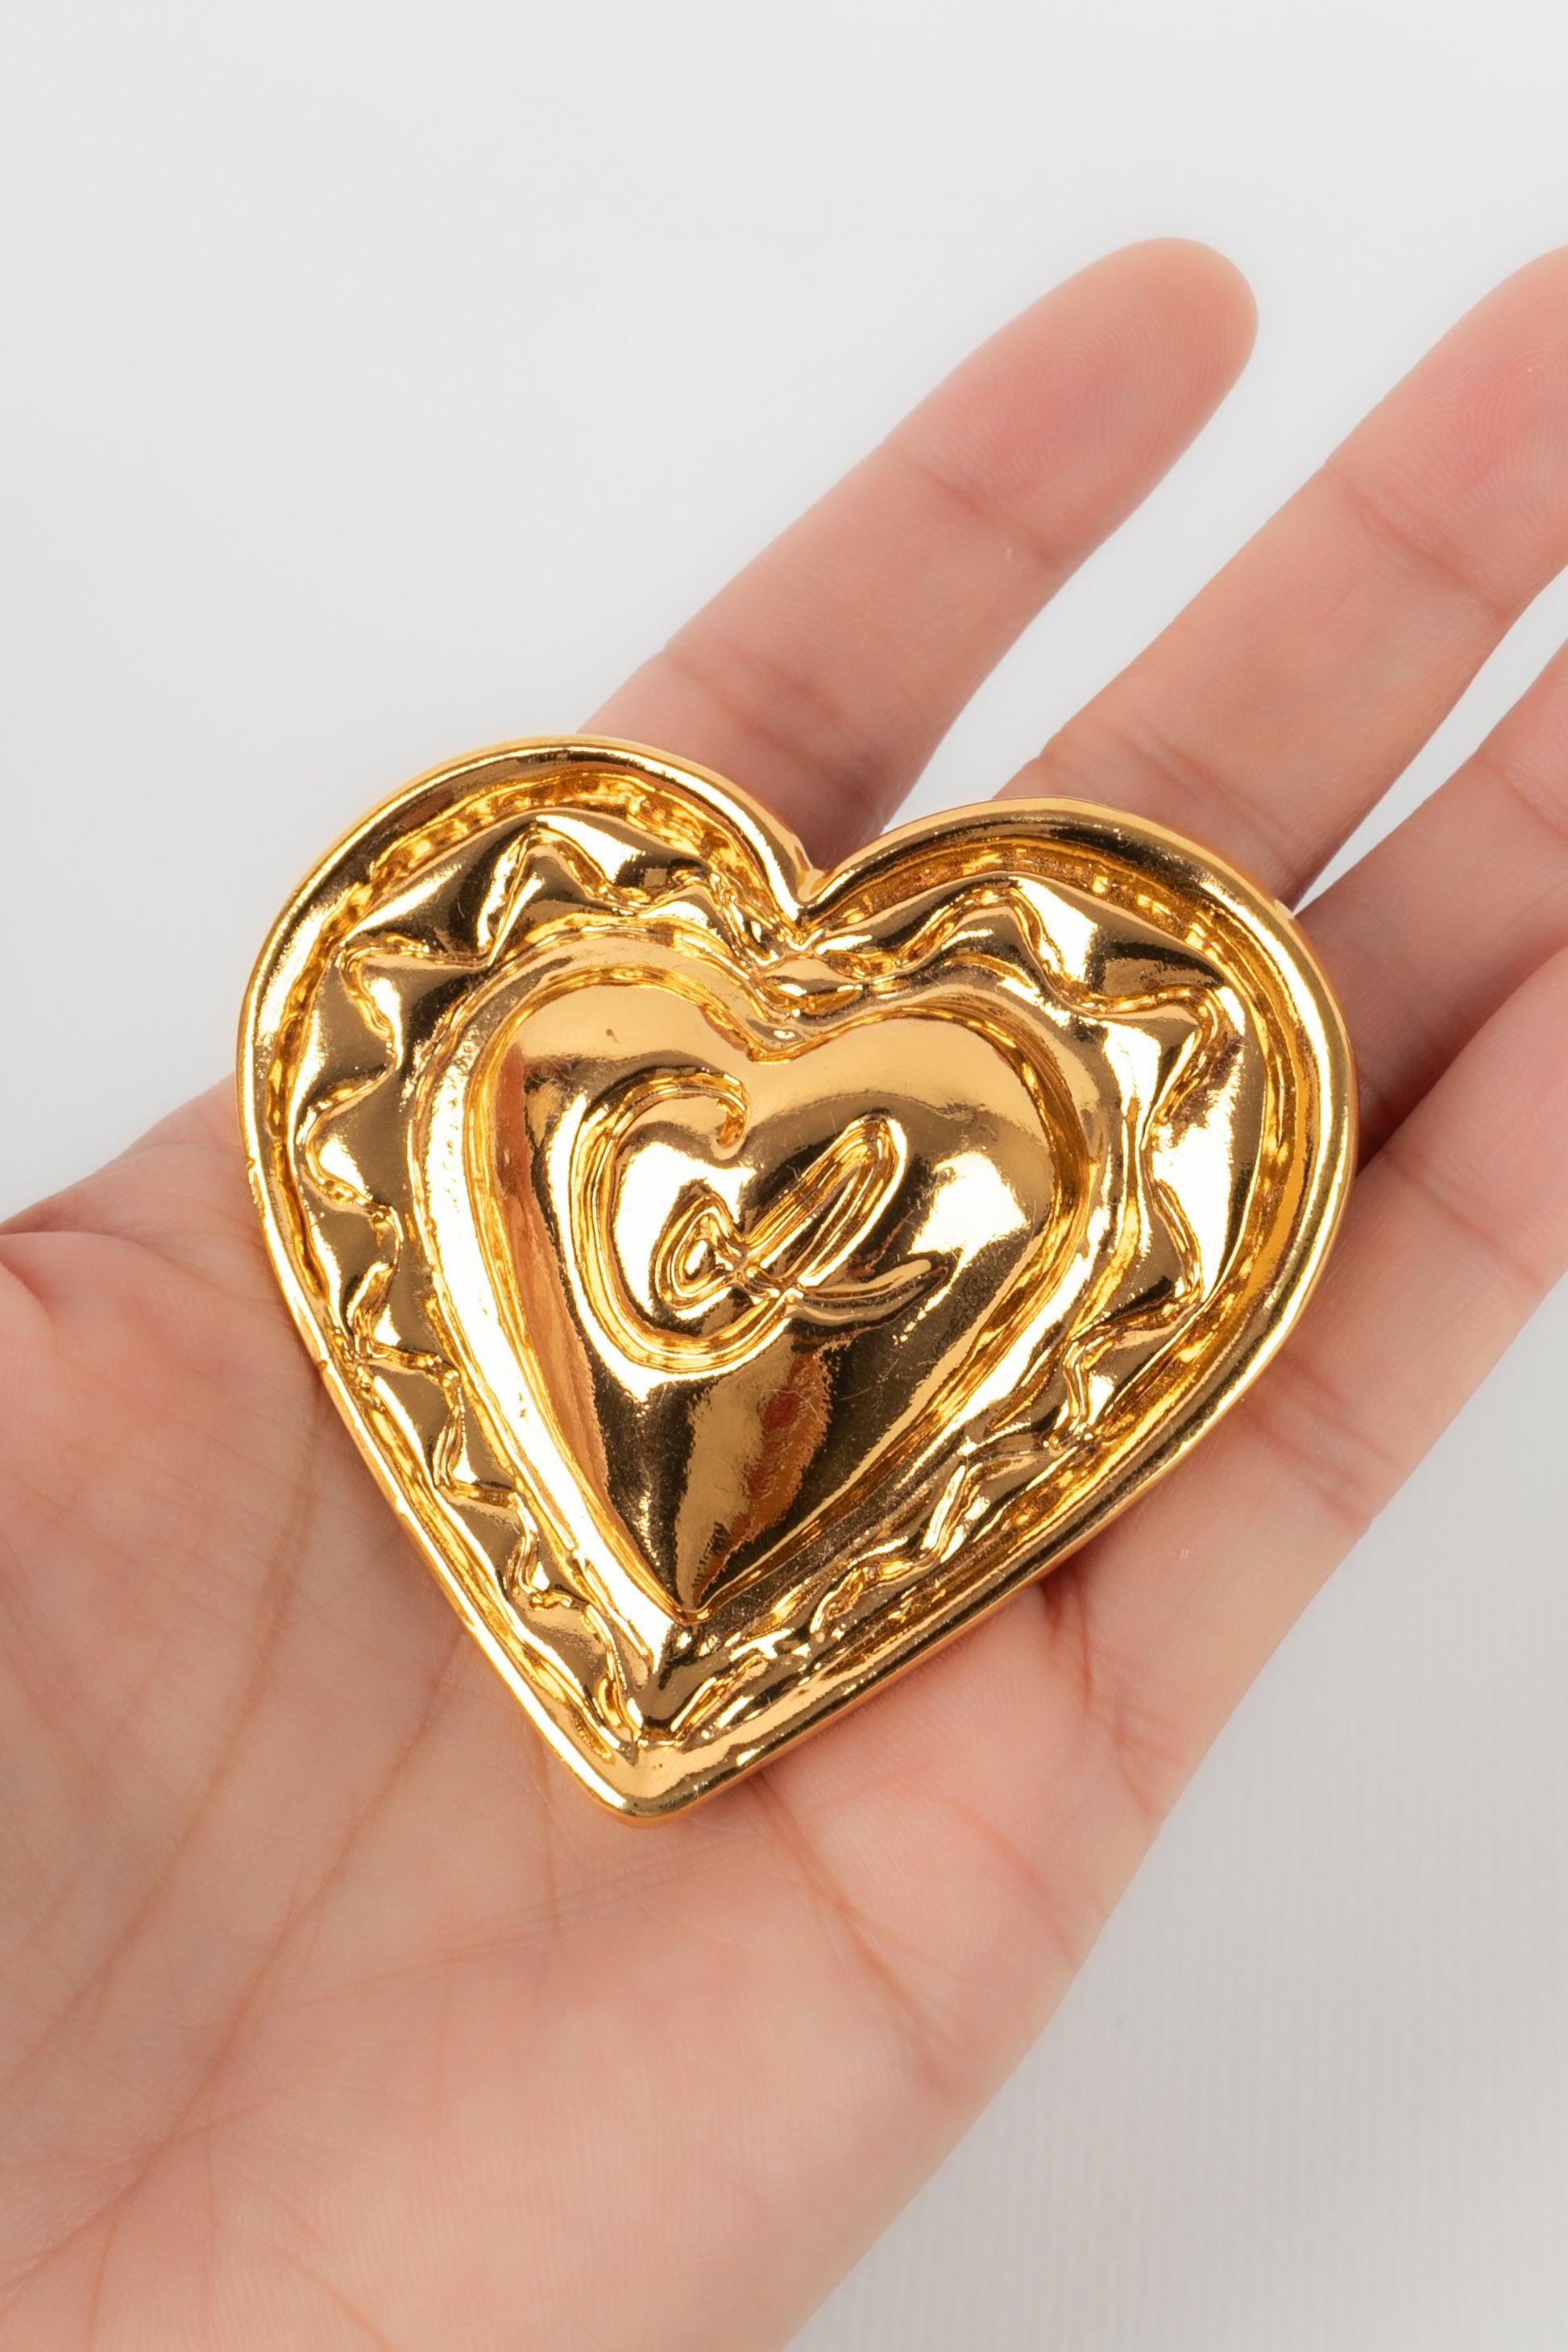 Christian Lacroix Brooch in Gilded Metal Depicting a Heart, Mid-1990s For Sale 1